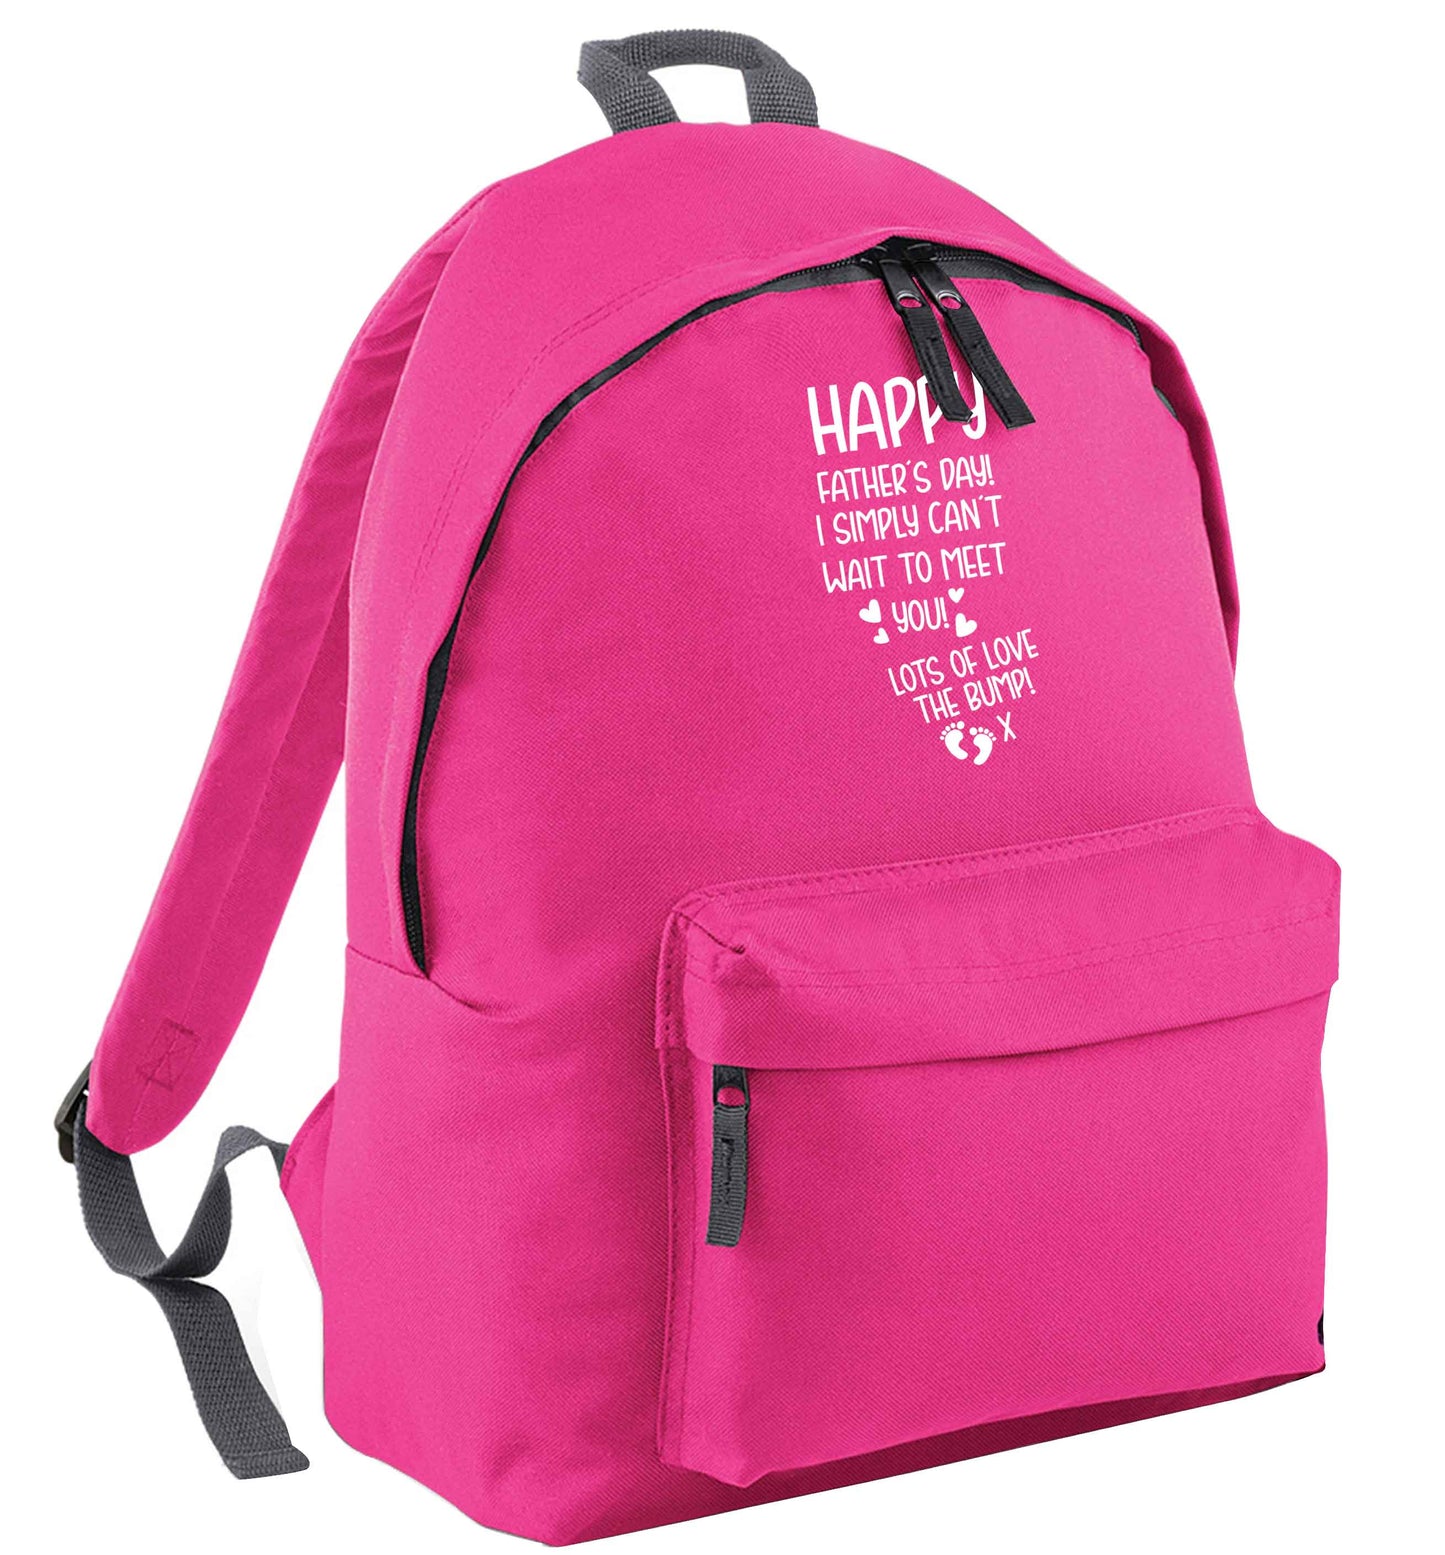 Happy Father's day daddy I can't wait to meet you lot's of love the bump! pink adults backpack